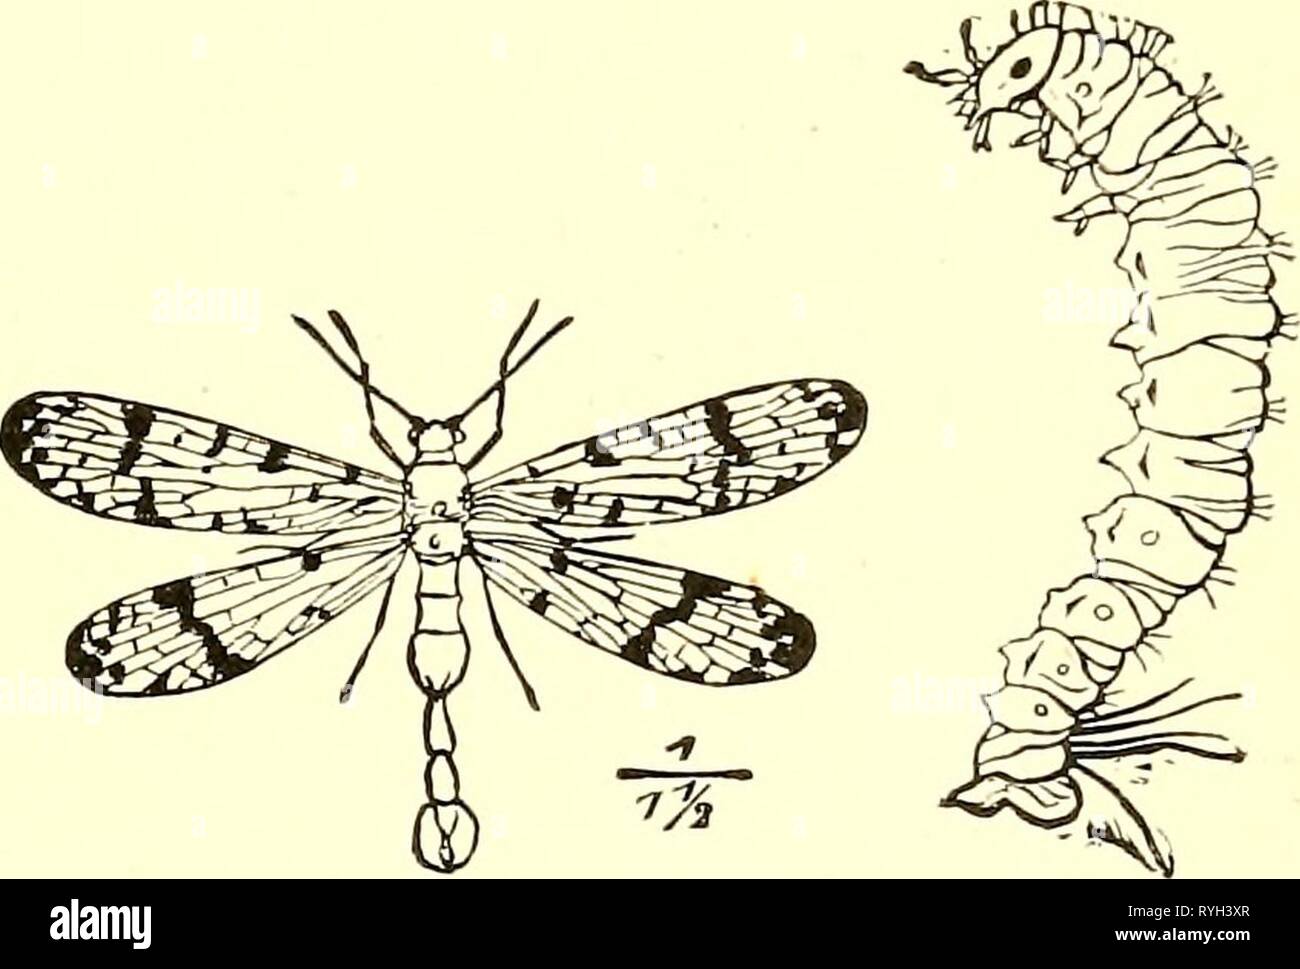 Economic entomology for the farmer and fruit-grower [microform] : and for use as a text-book in agricultural schools and colleges  economicentomolo00insmit Year: 1896  Mantispa species.—Showing the legs and body from the side.    A Panorpa, or scorpion-fly, and its larva. what like the sting of a scorpion, and from this the common name is derived. As a matter of fact, the insects are entirely harmless save to others of their kind, for they are predaceous. The genus Bittaais is narrower winged, with unusually long legs, looking somewhat like a crane-fly at first sight. Species belonging to the  Stock Photo